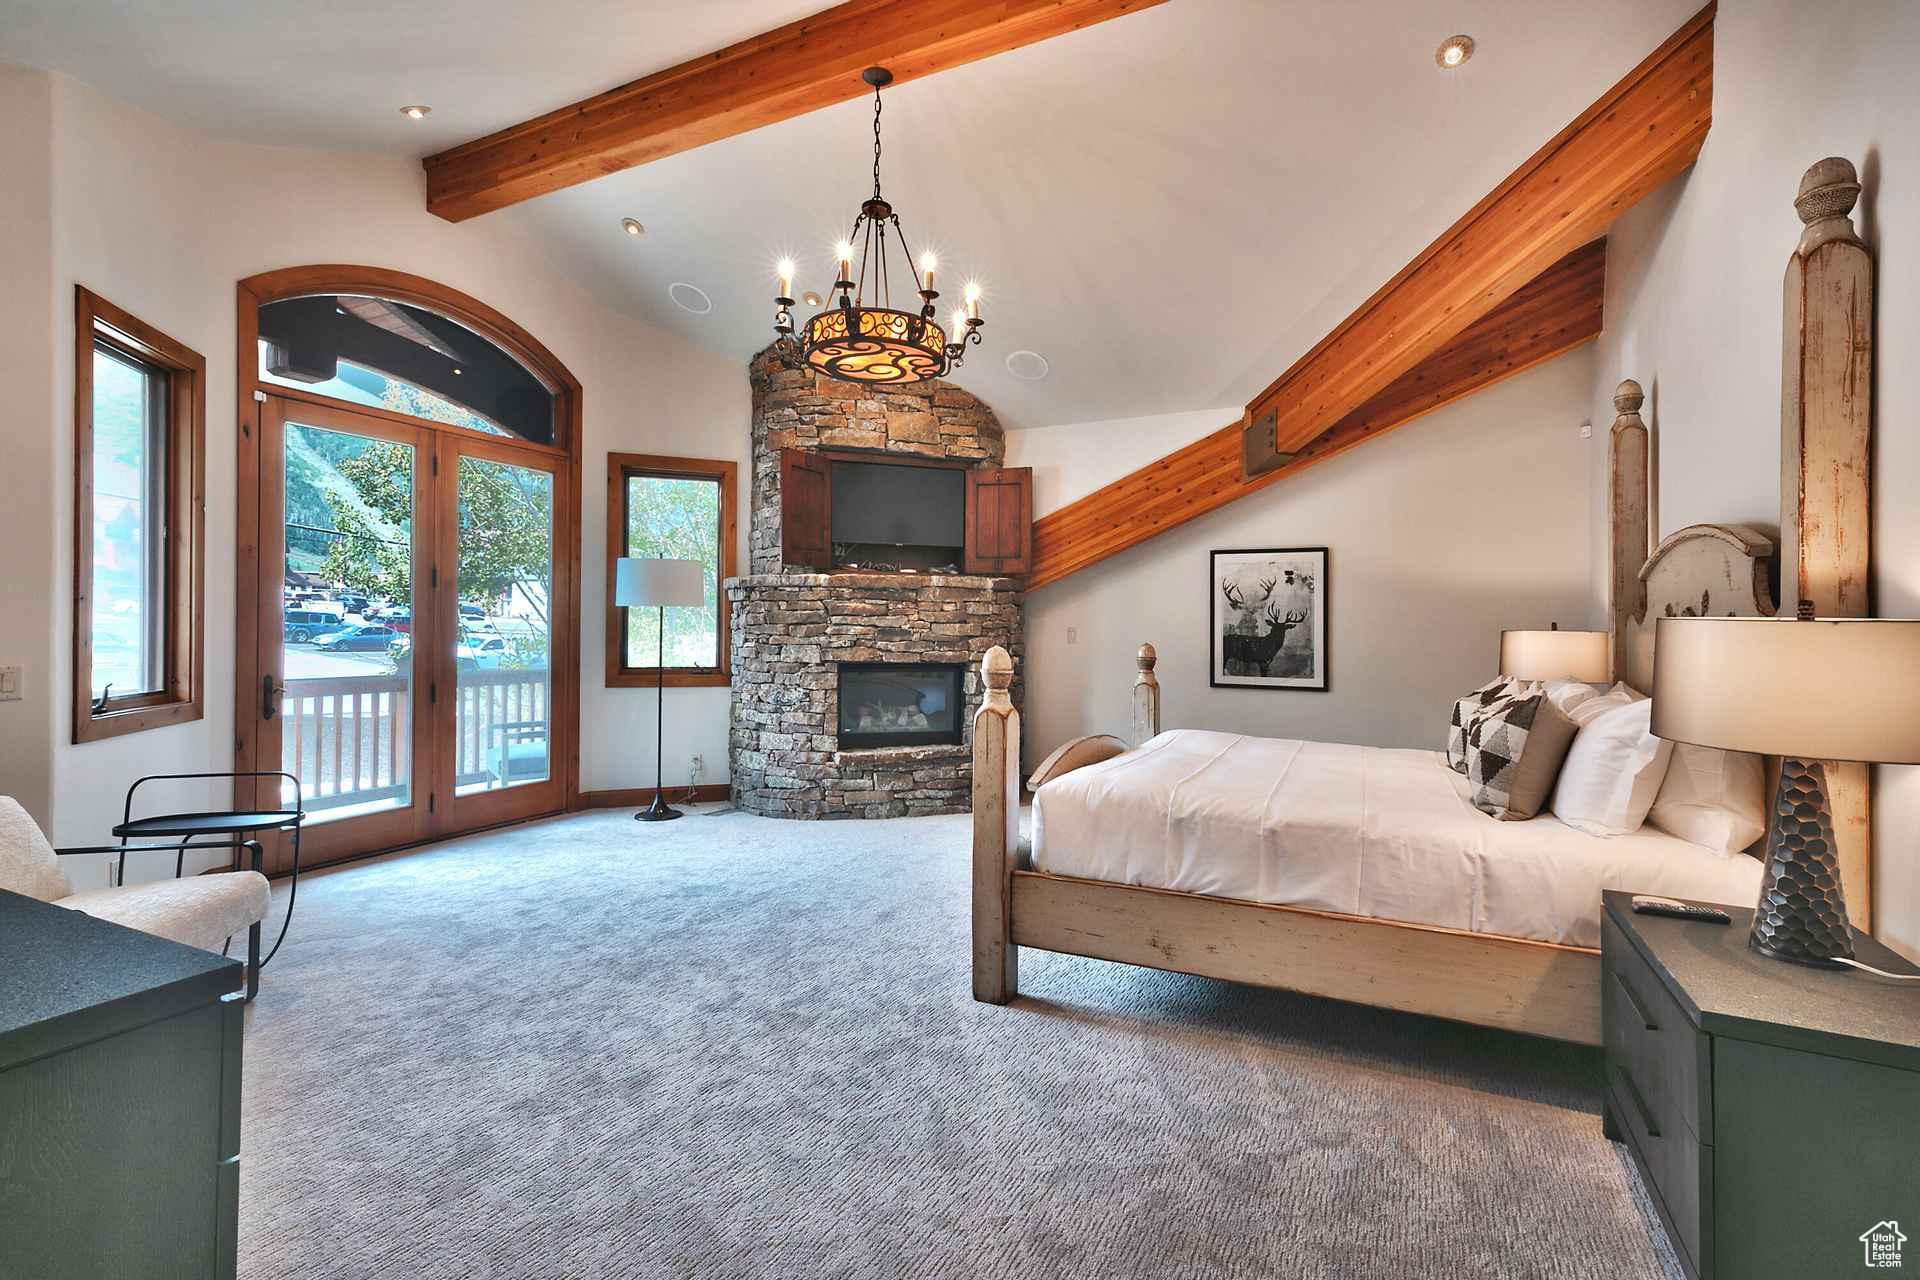 Bedroom featuring a stone fireplace, lofted ceiling with beams, carpet flooring, access to outside, and an inviting chandelier